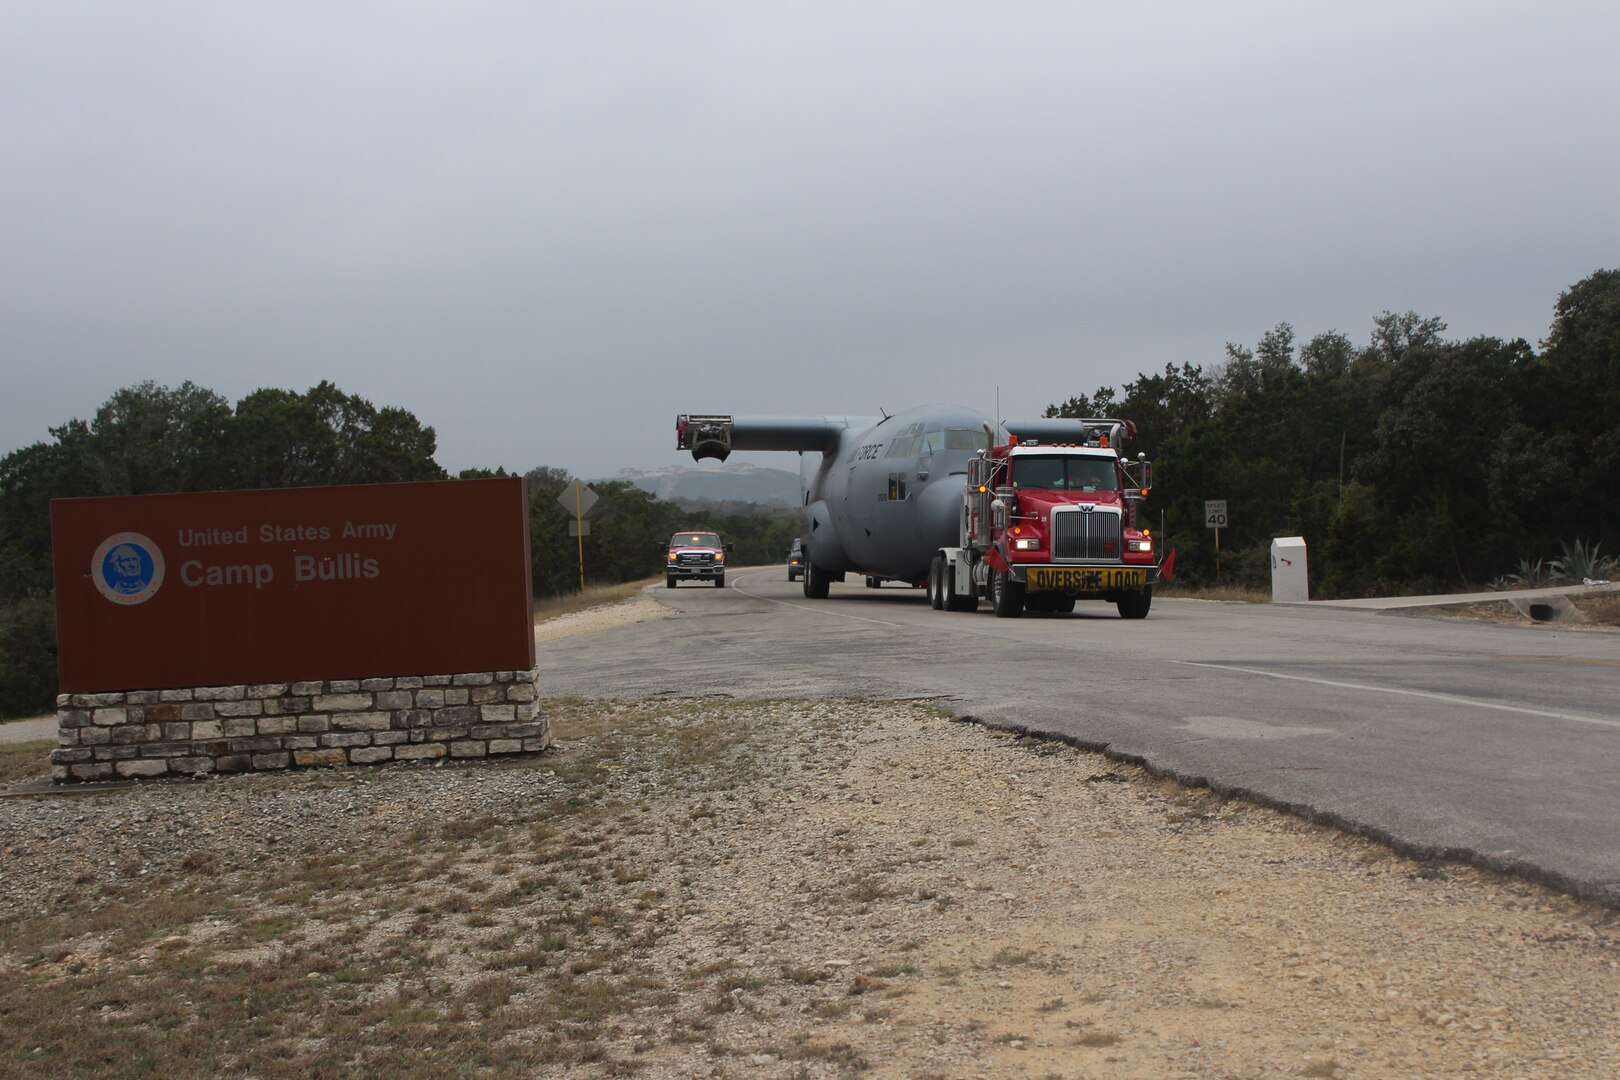 The retired C-130 Hercules cargo aircraft arrives at Joint Base San Antonio-Camp Bullis  and heads to its final destination at the Medical Readiness Training Center Sunday.  At the MRTC, 937th Training Group, headquartered at JBSA-Fort Sam Houston, instructors will eventually train about 1,300 military students each year who are participating in the aeromedical evacuation and patient staging course.  The 502nd Trainer Development Squadron members at JBSA-Randolph were responsible for the aircraft's four-hour move and will also accomplish the simulation project inside the aircraft that will simulate sights, sounds and smells of a medic's combat environment.